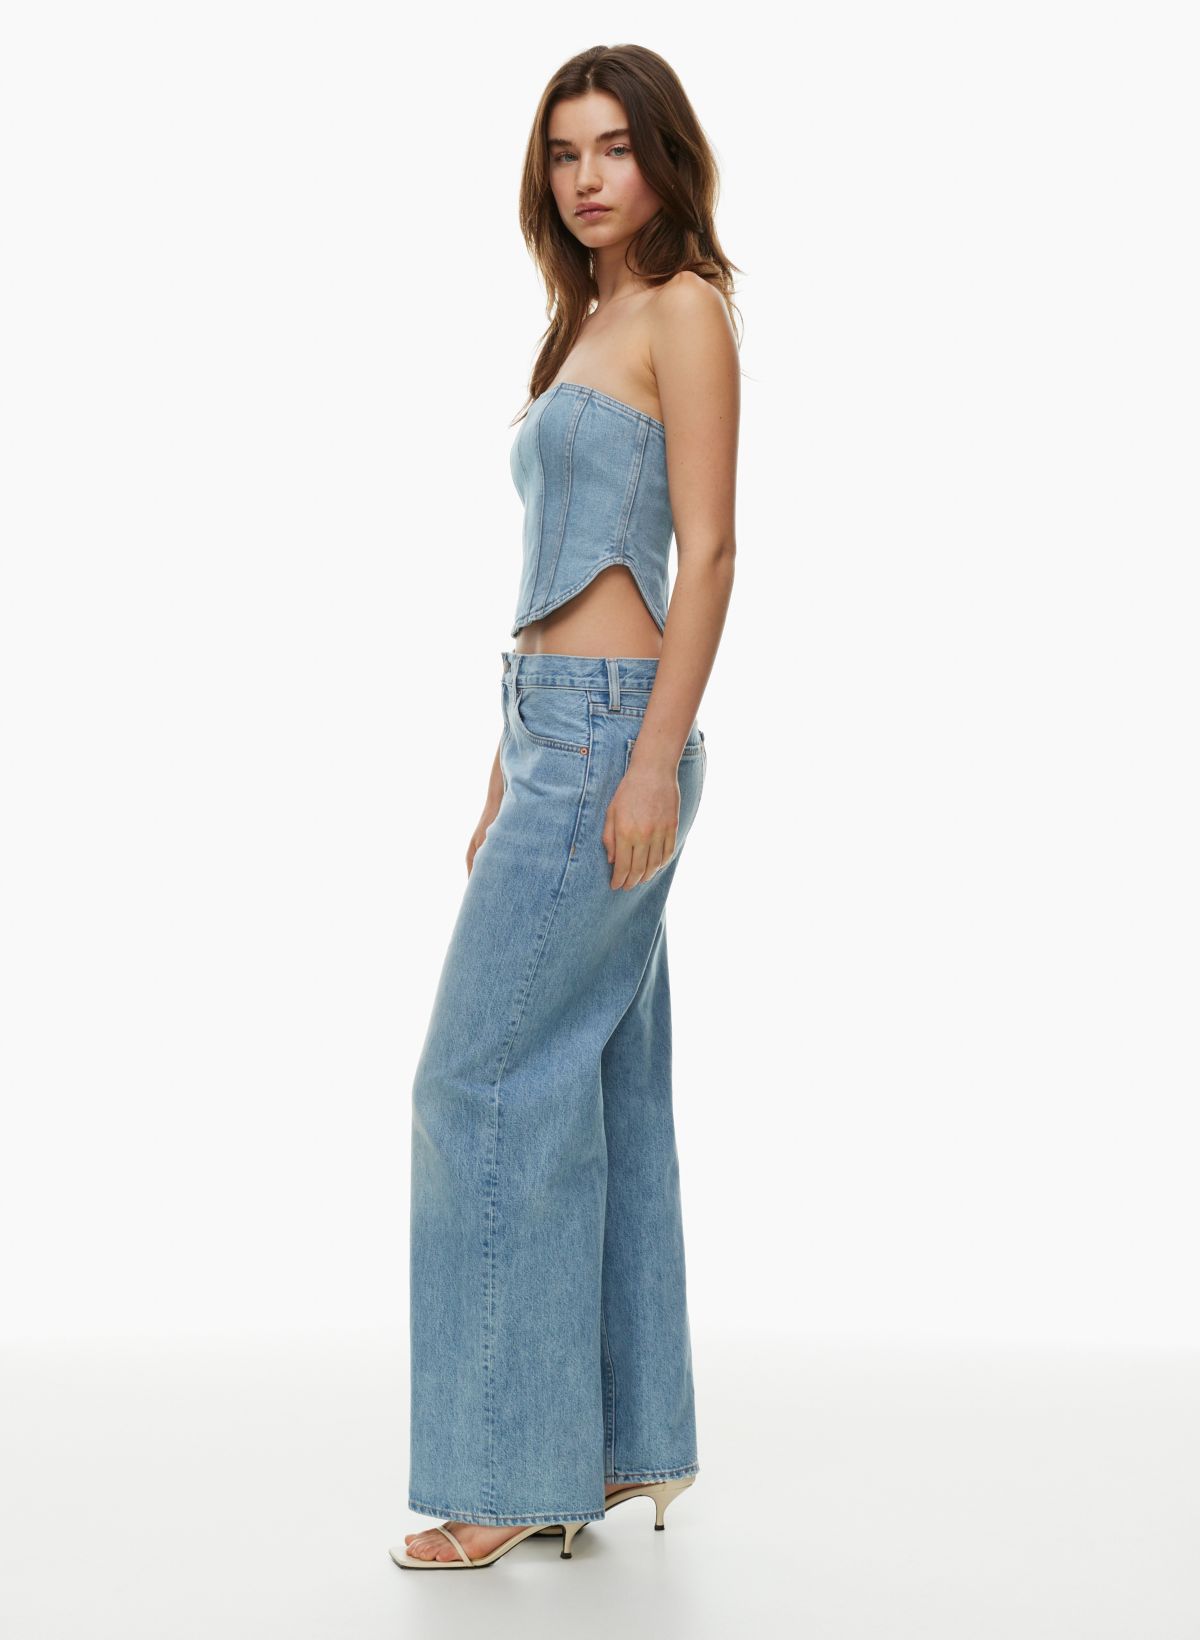 the 90s lo-rise baggy wide jean